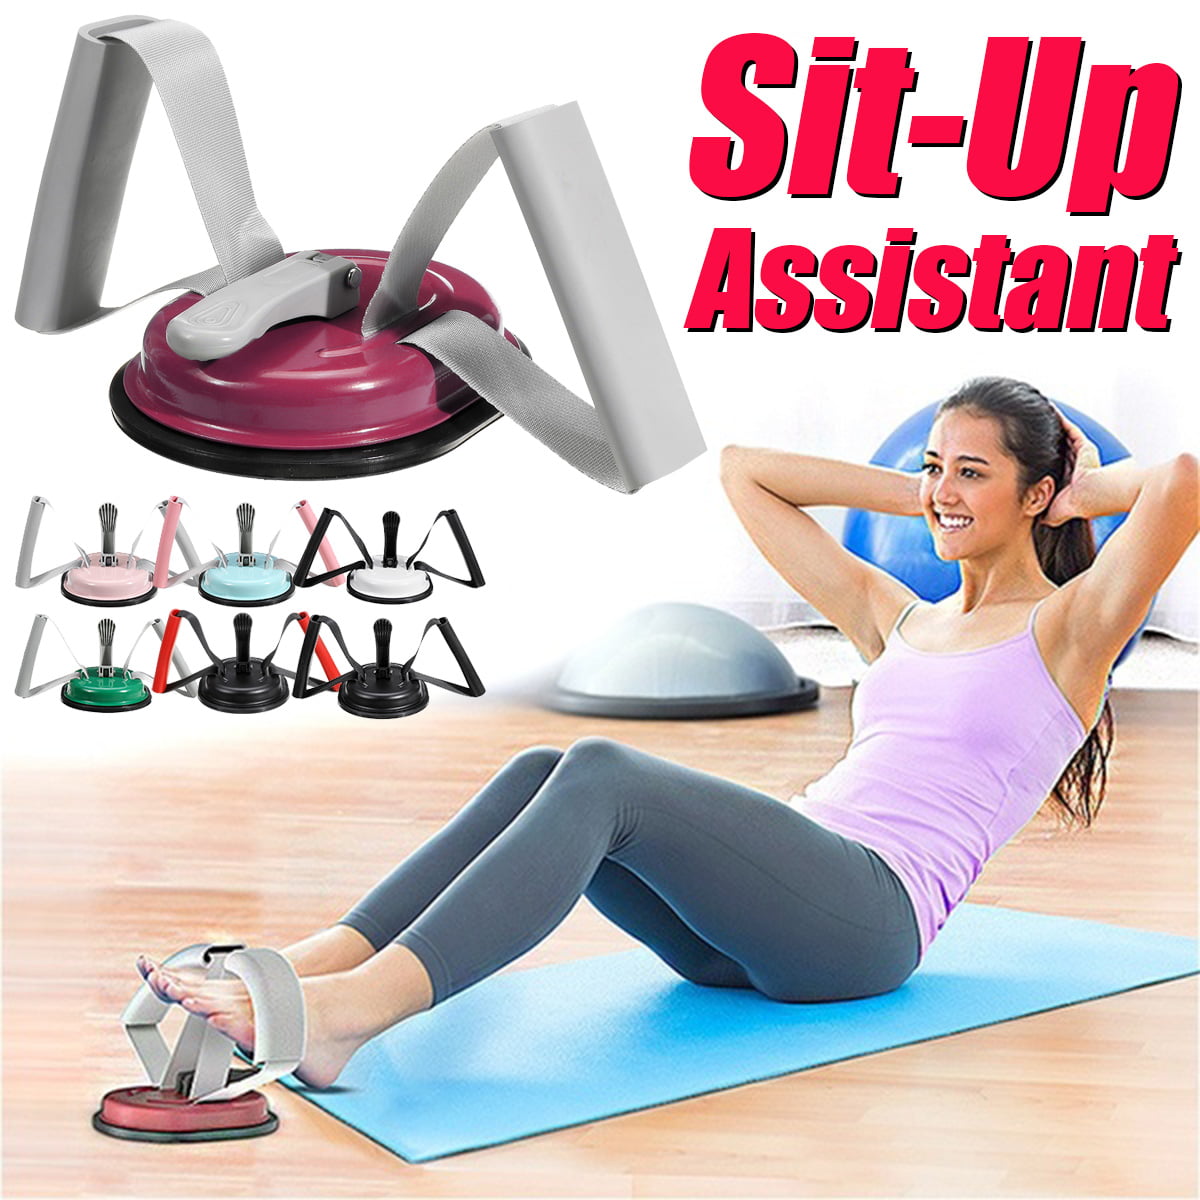 Sit Up Assistant Device Abdominal Exerciser Gym Muscle Exercise Fitness Home